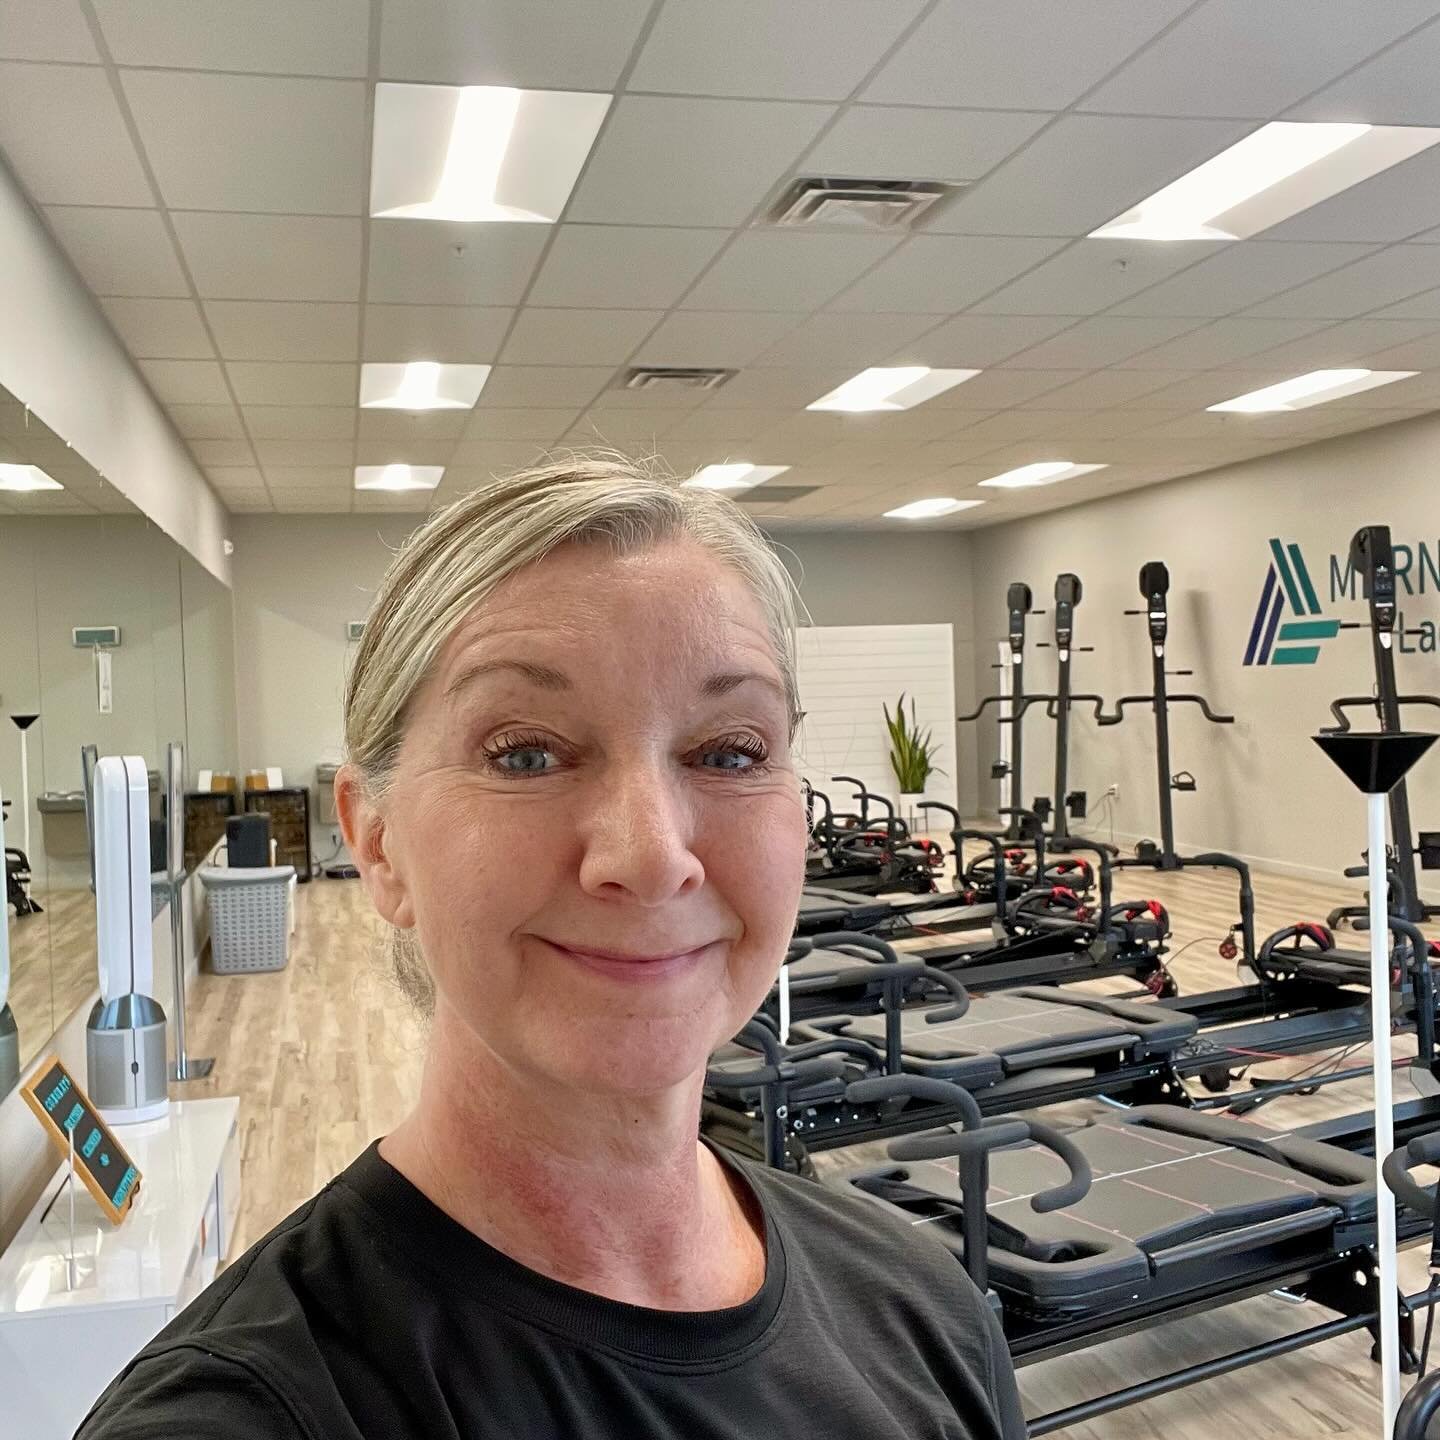 I love the Lagree Method!  I&rsquo;ve been going to classes @mdrnfitnesslagree for way over a year and teaching there for about two months. Spokane friends- Share the Love week is coming up February 10th-17th. If you&rsquo;d like to try it out for fr